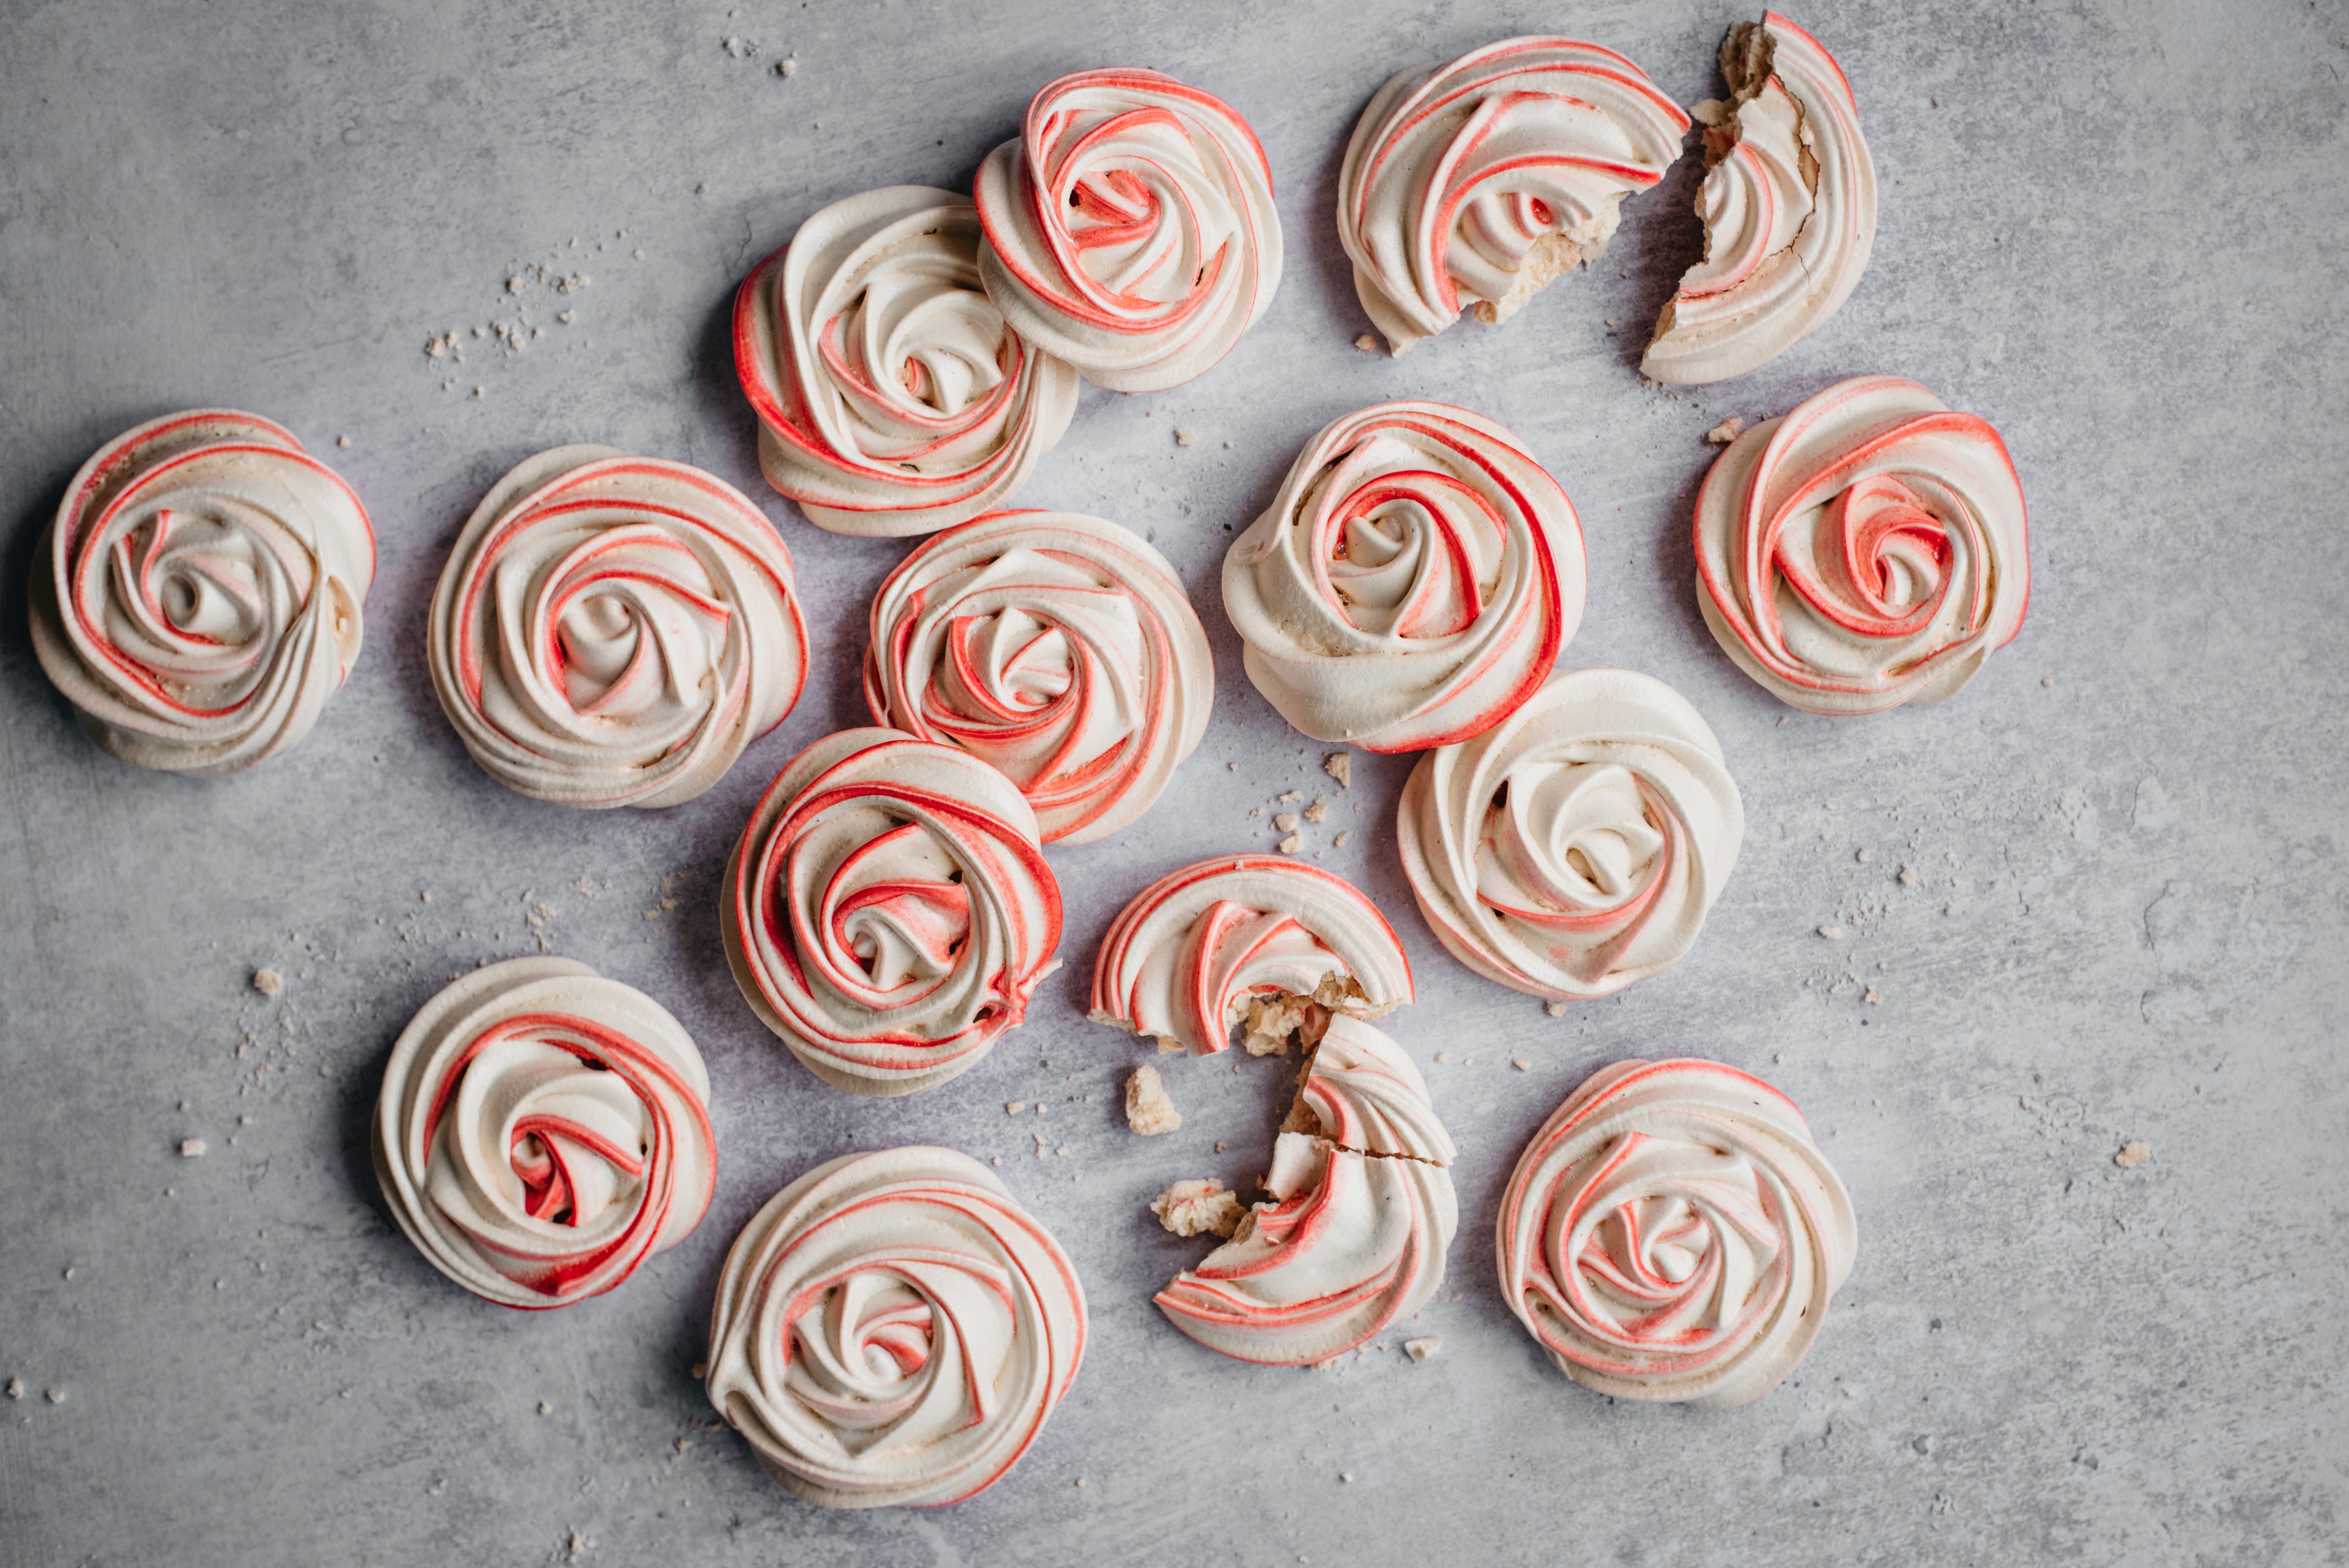 Top view of Vegan Meringue nests, cracked open with swirls of pink food colouring